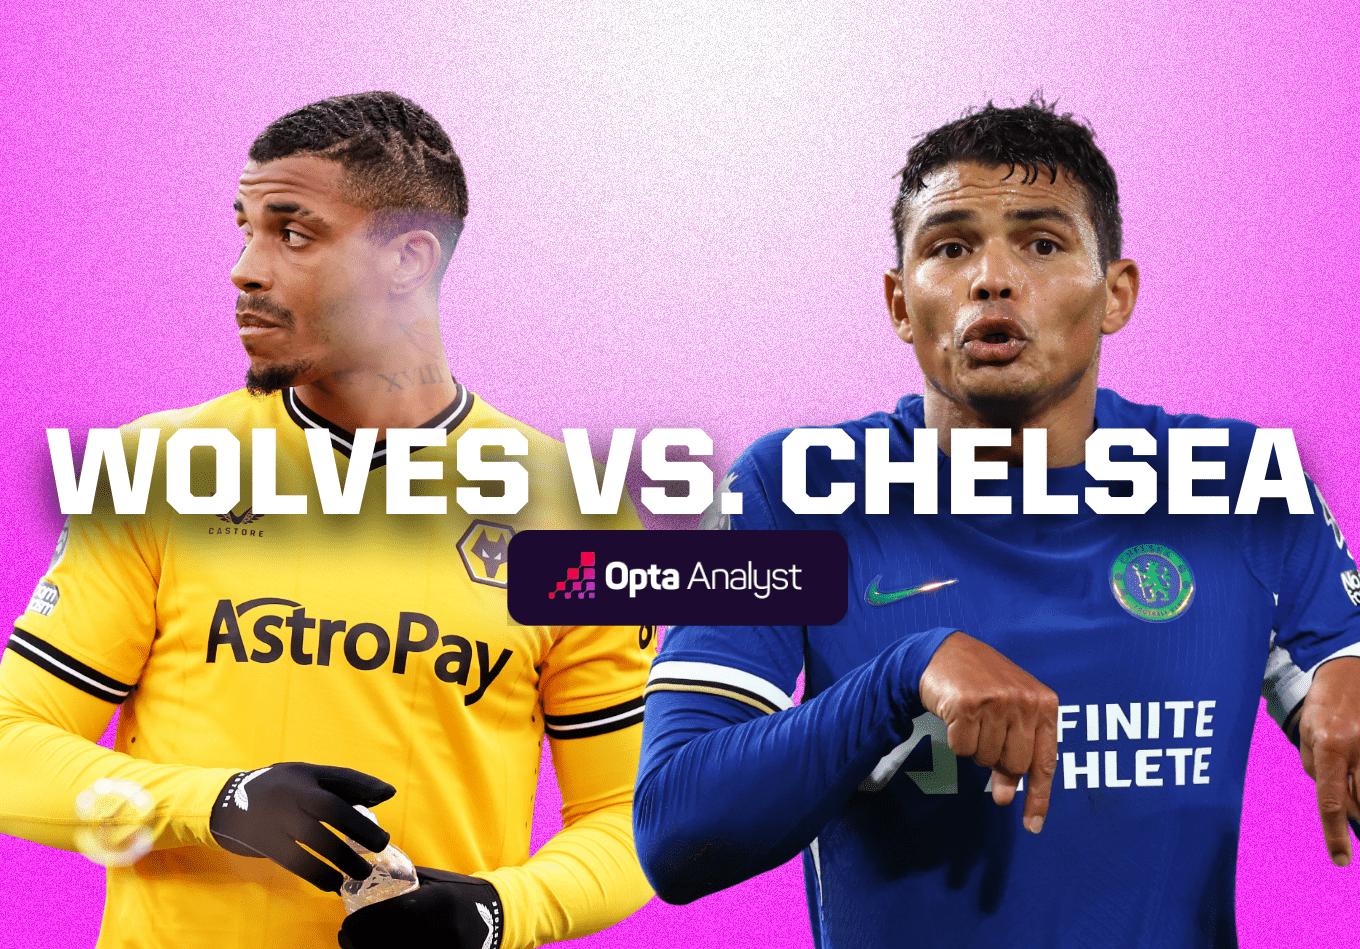 Wolves vs Chelsea: Prediction and Preview